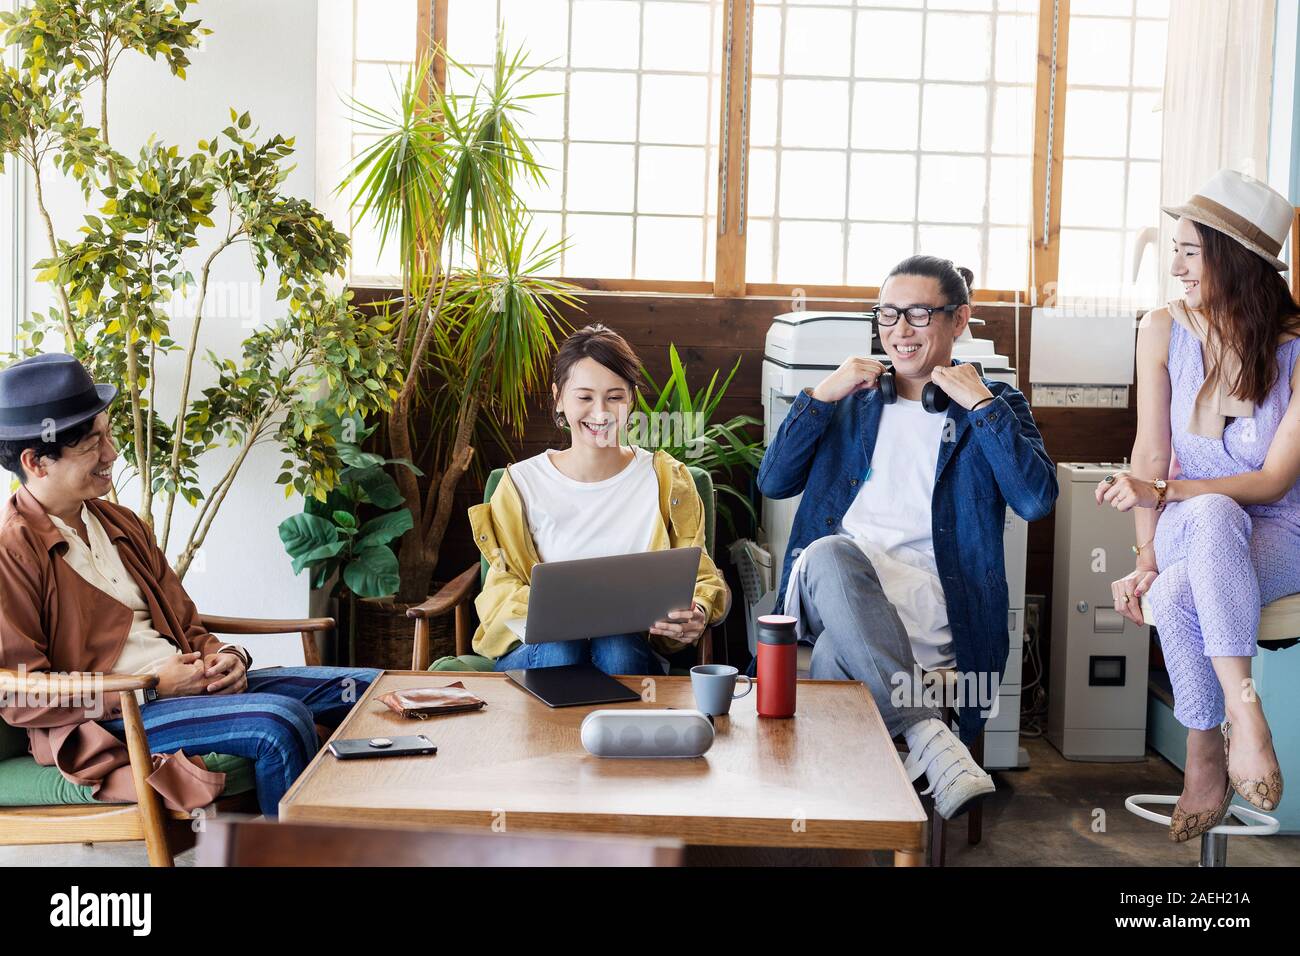 Group of young Japanese professionals working on laptop computers in a co-working space. Stock Photo